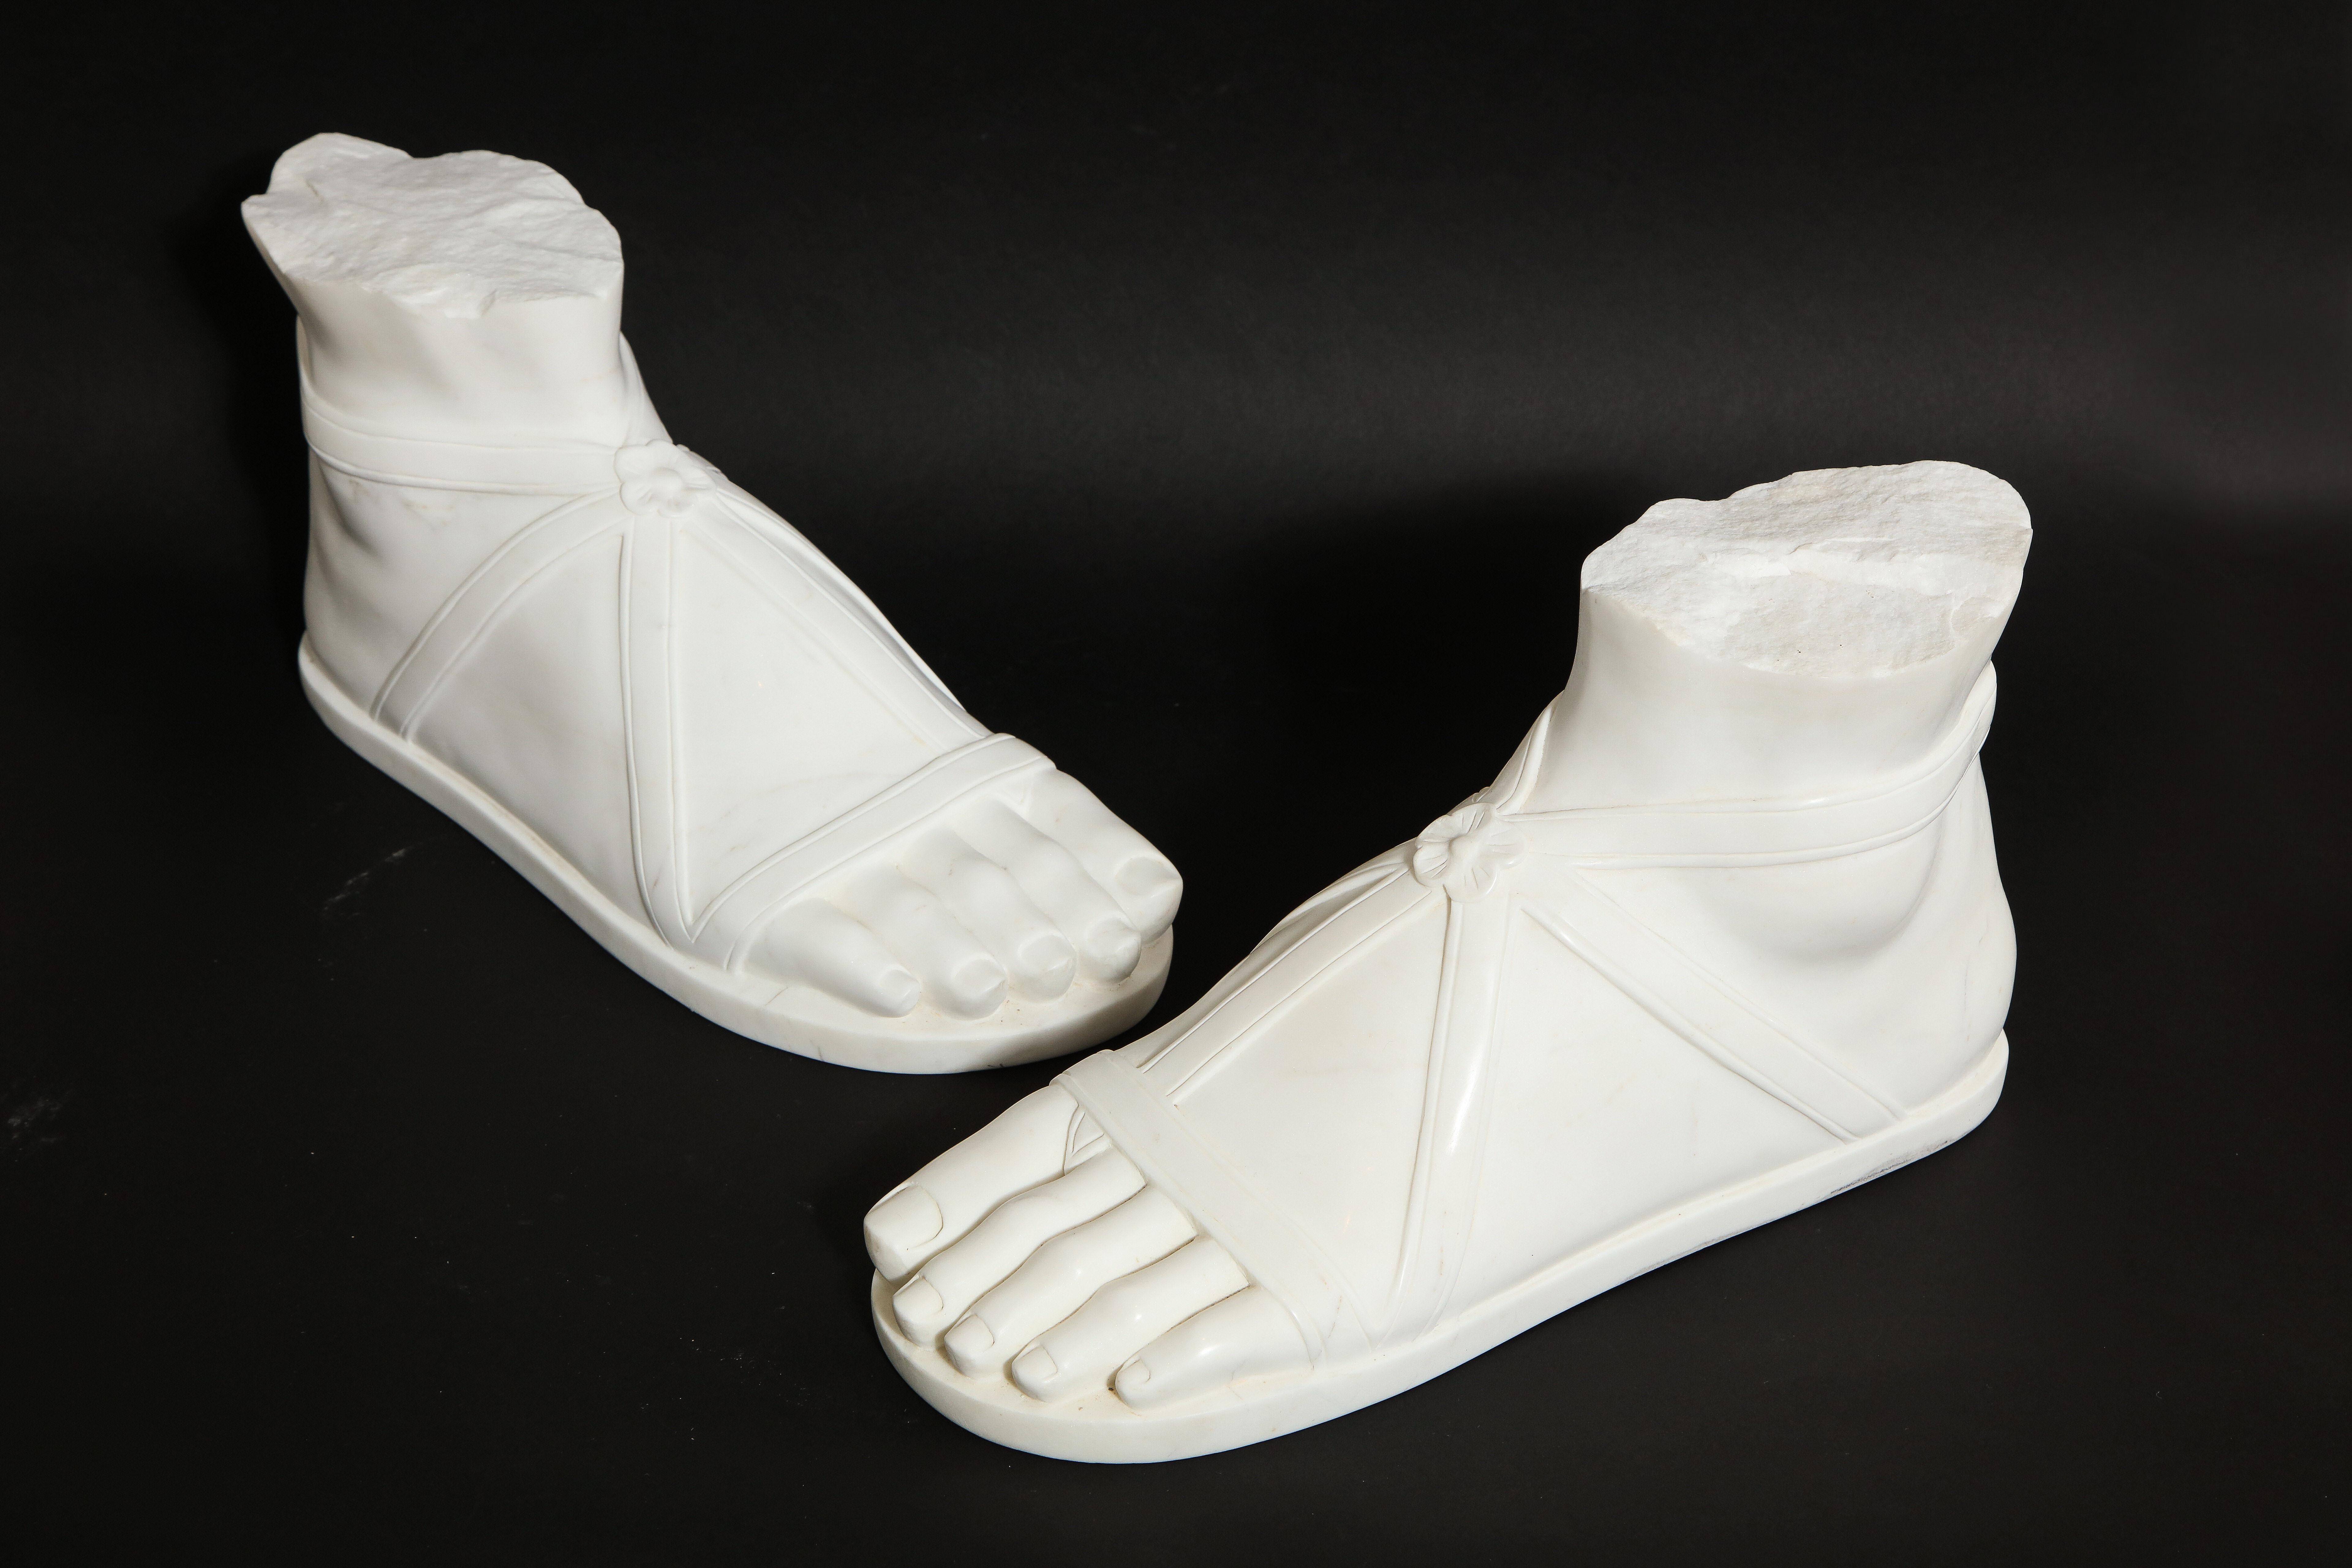 A fabulous and quite decorative, and large pair of Italian Roman Grand Tour Carrara marble feet. Each is exceptionally hand carved with meticulous detail and craftsmanship. They are exquisitely made to look as life-like as possible. Each foot is